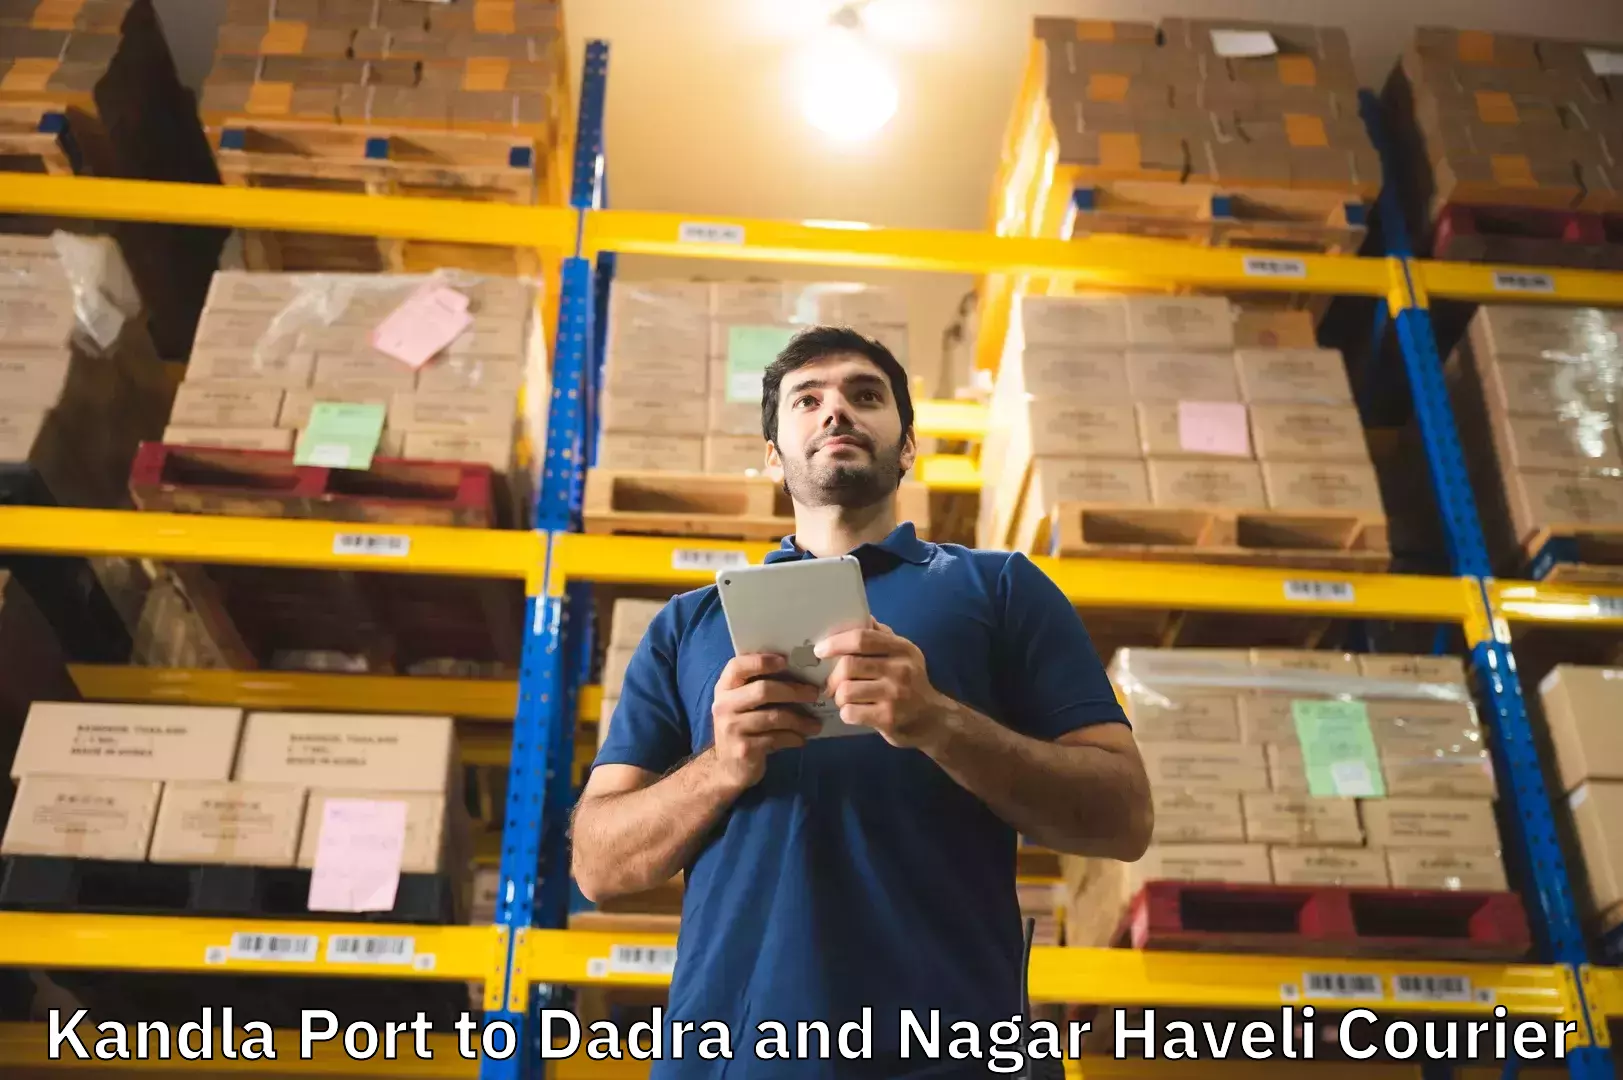 Luggage storage and delivery in Kandla Port to Dadra and Nagar Haveli